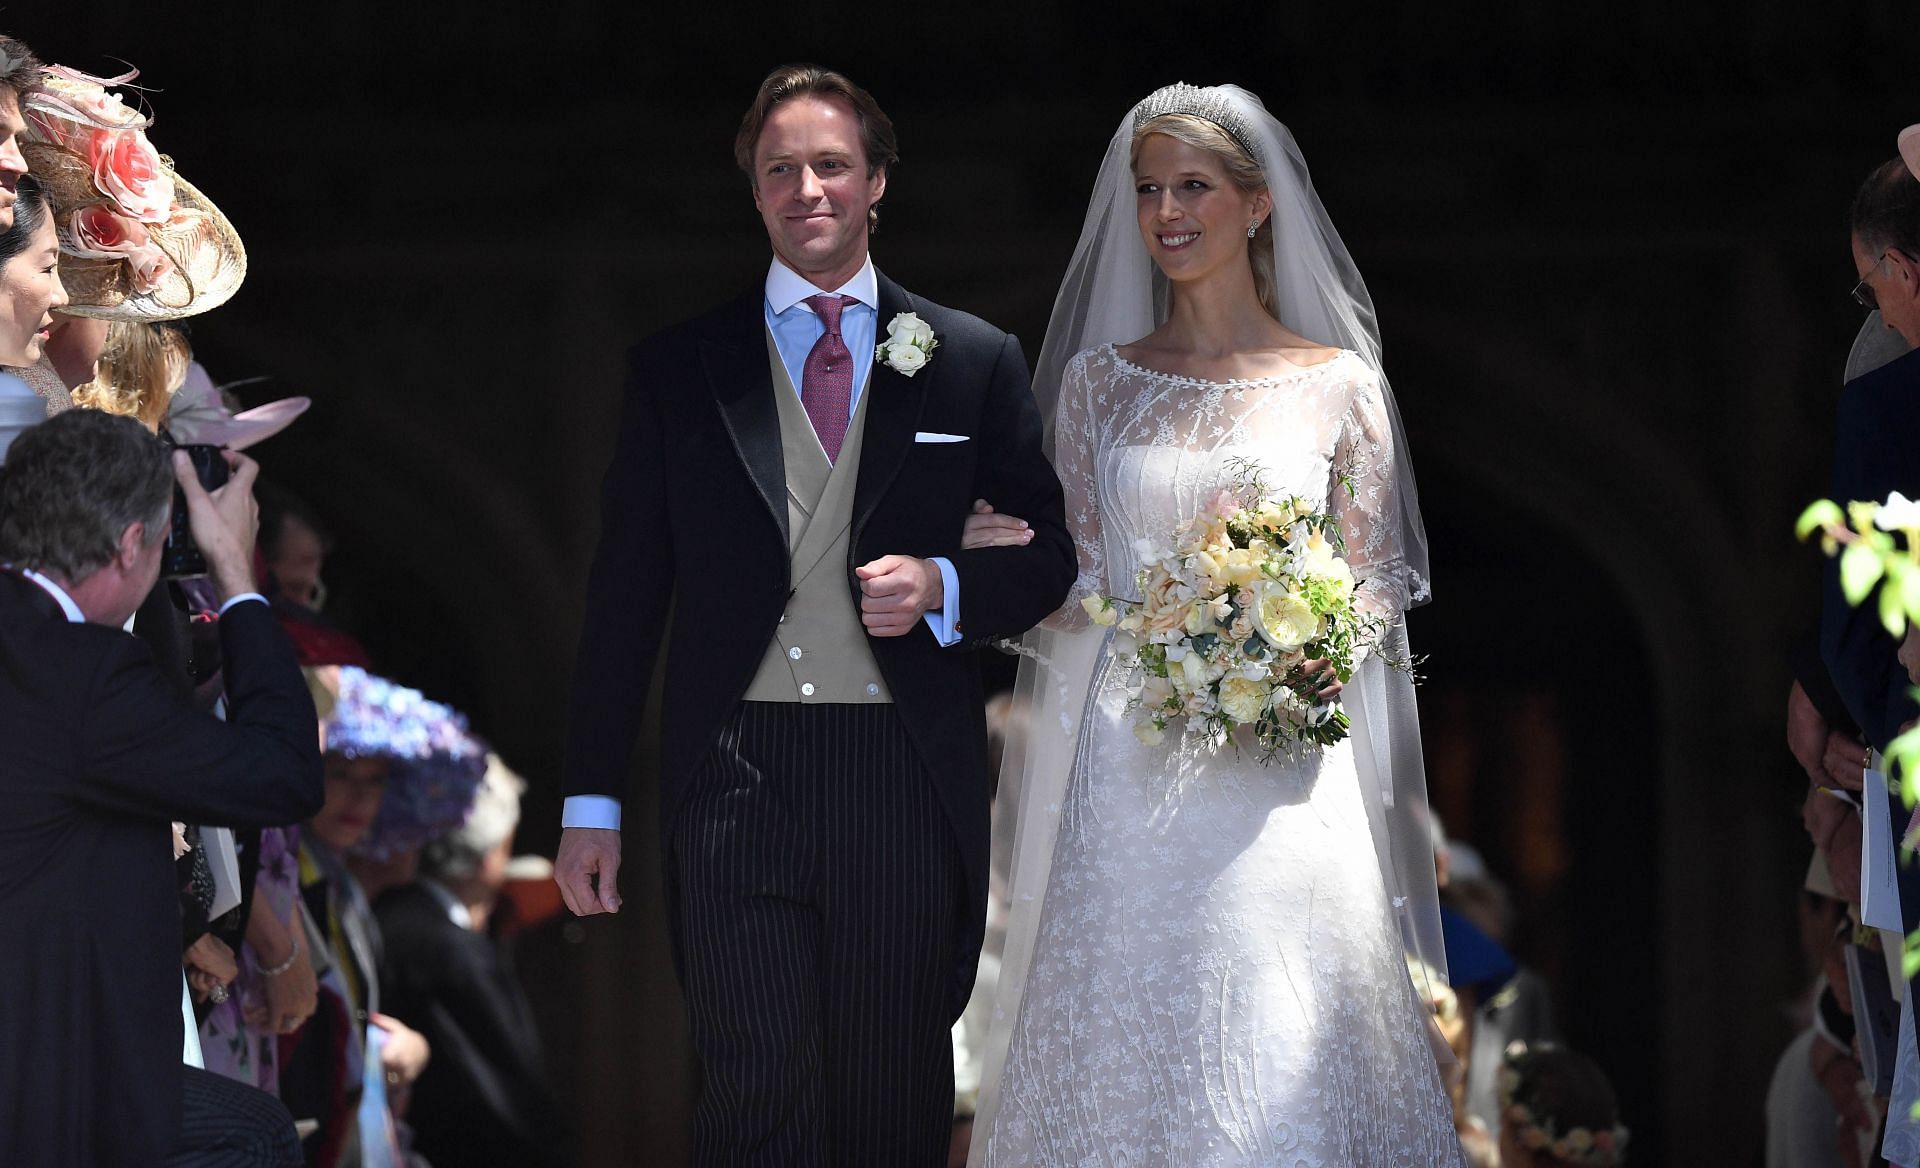 Thomas Kingston and Lady Gabrielle Windsor pictured on their wedding day (Image via Getty Images)